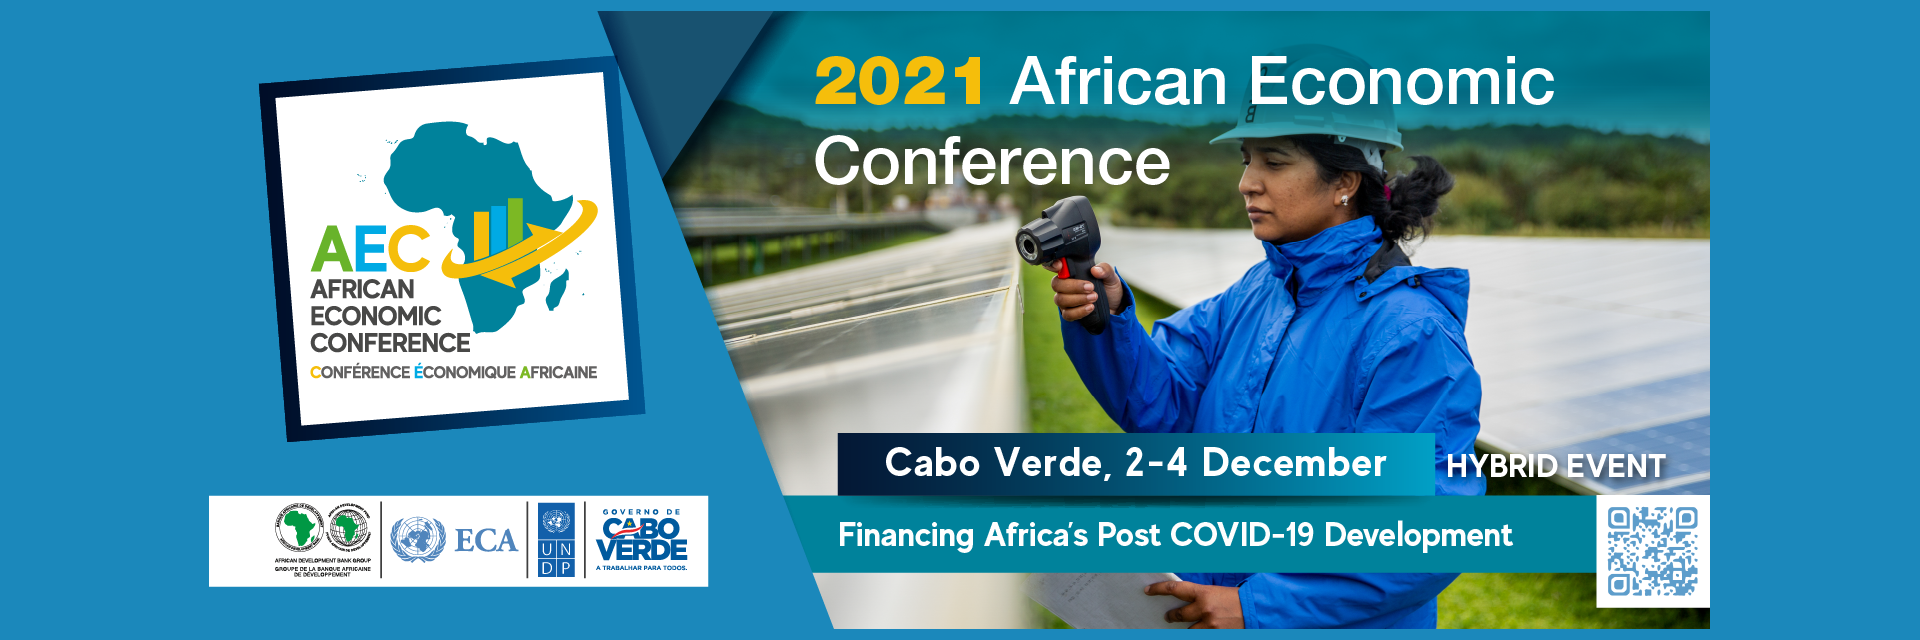 Cabo Verde set to host hybrid 2021 African Economic Conference on financing development in the Covid-19 era